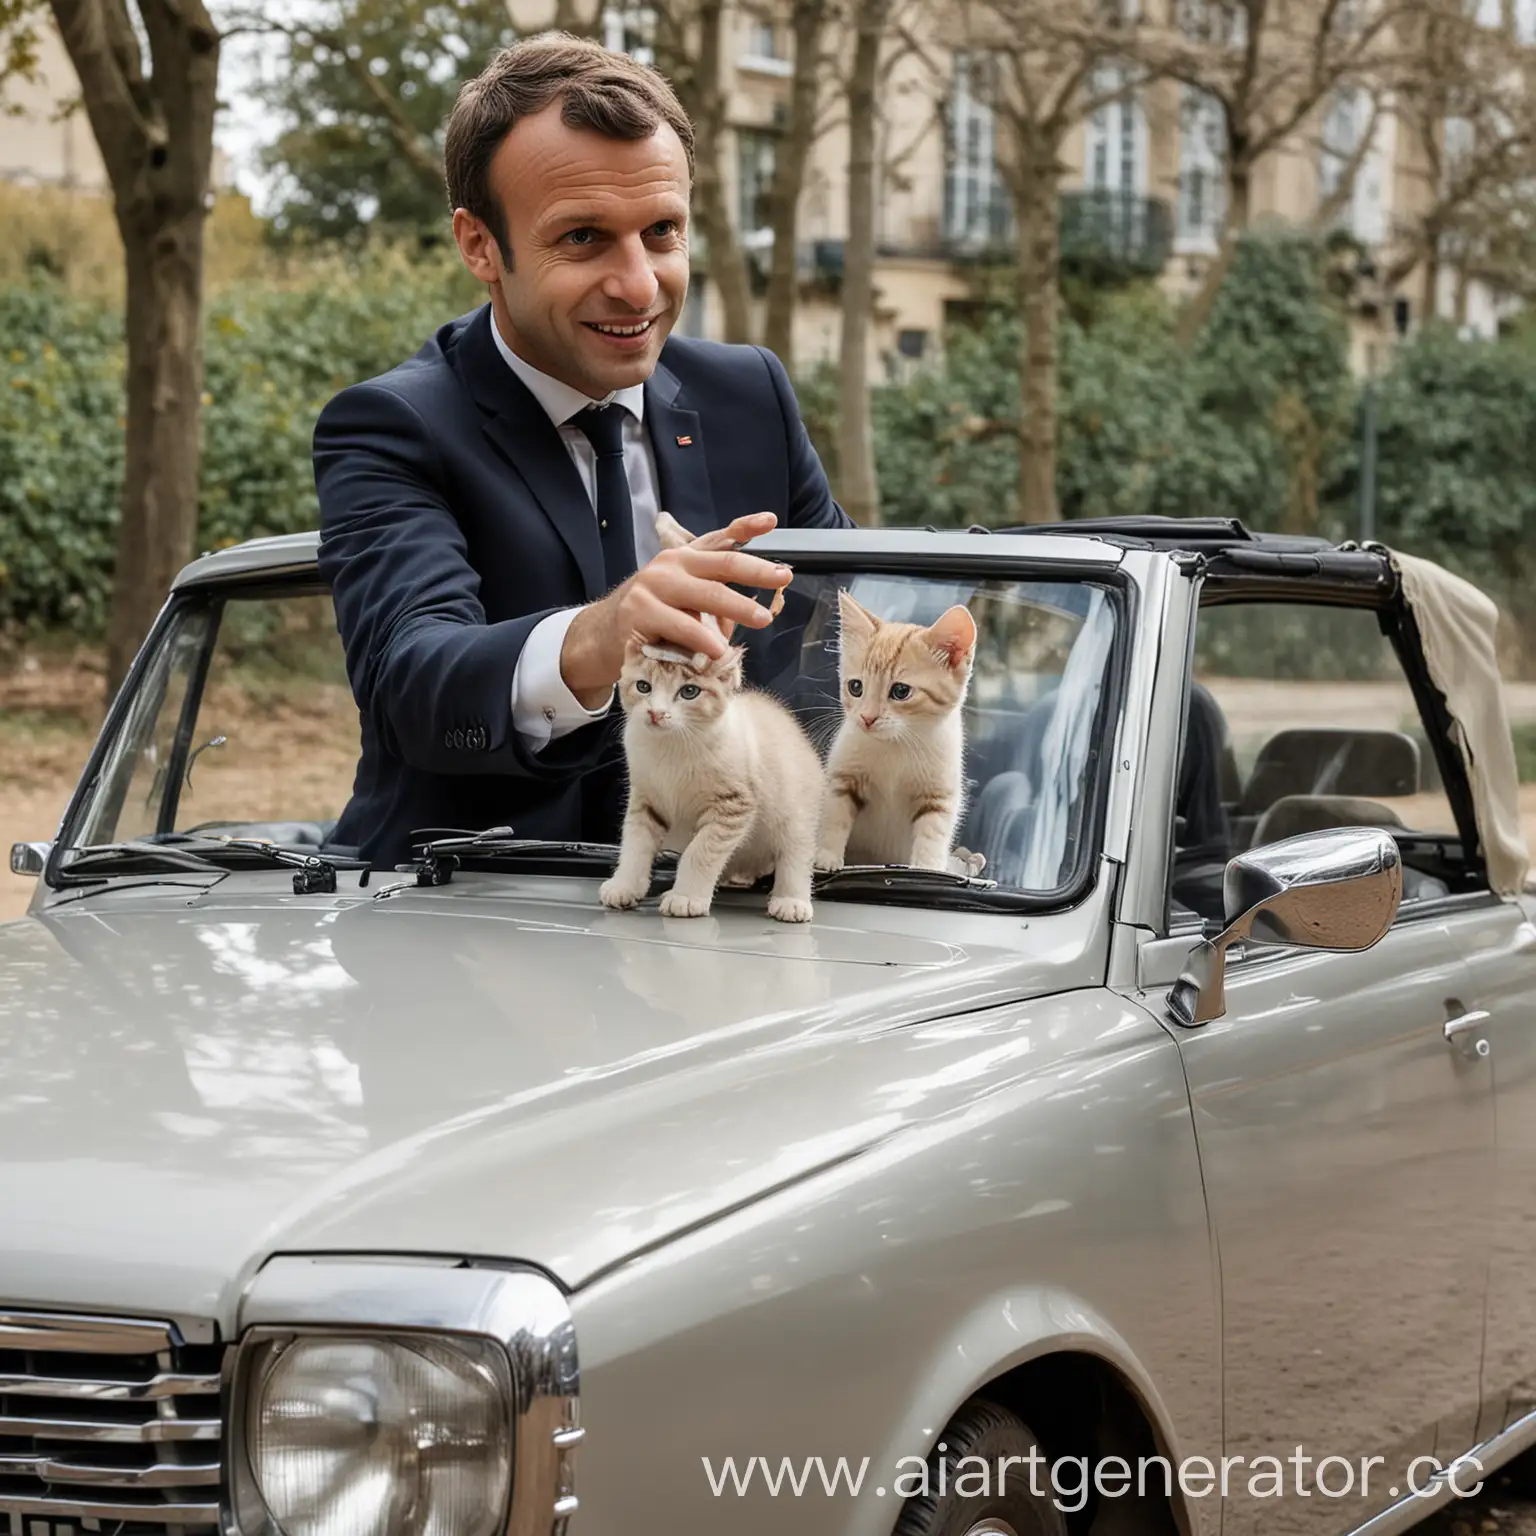 a kitten eats a lot  and real face 
 40 yearsold Emmanuel Macron flies past from behind, reallook  hand fingers who is sitting on a Citroen lux president car,